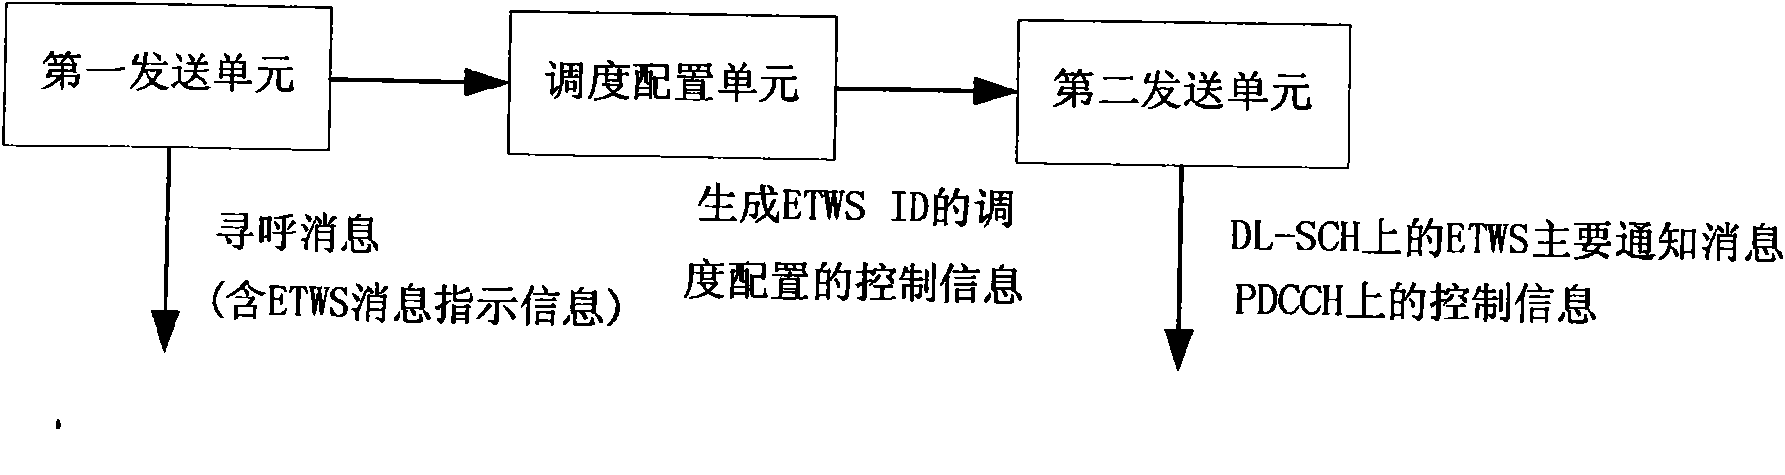 Method and system for transmitting major notification messages of earthquake and tsunami warning system